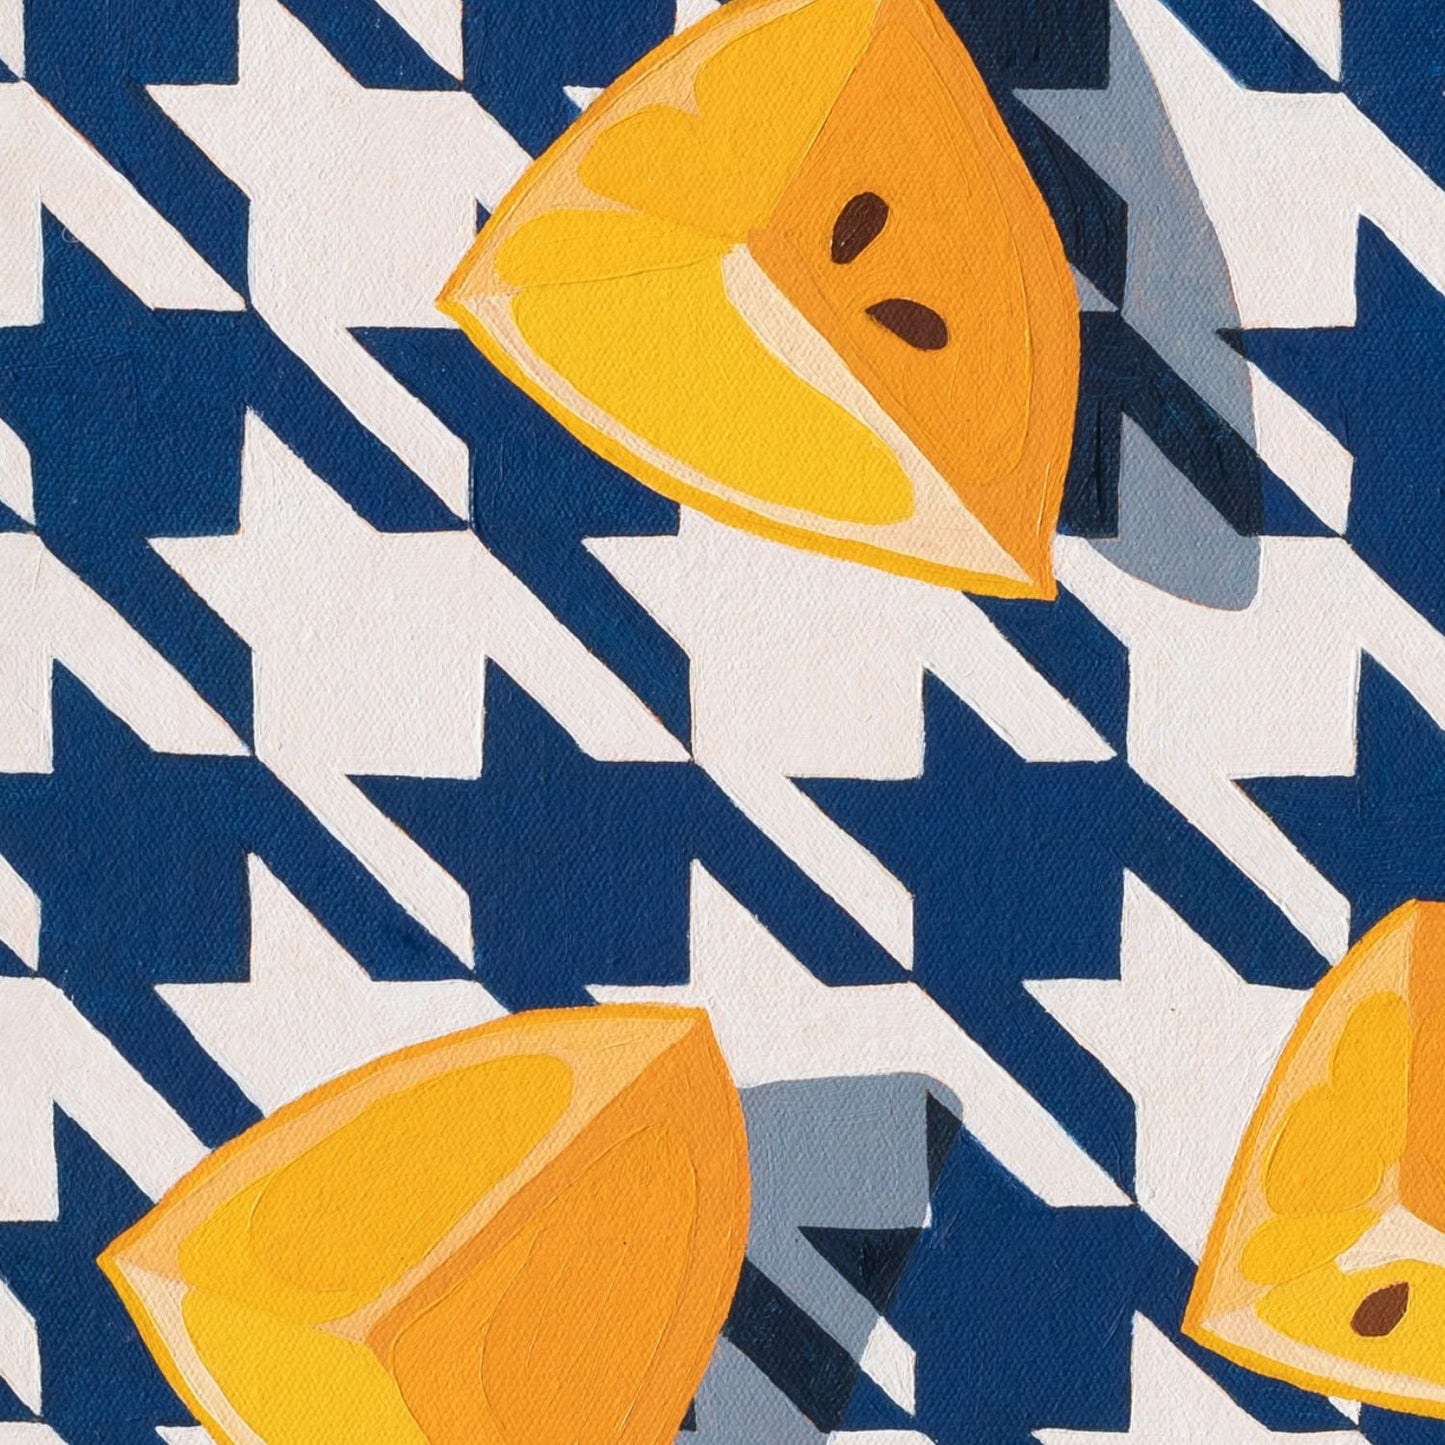 fine art print of a colorful and modern original oil painting of bright yellow lemons on a houndstooth navy blue and white background with strong shadows